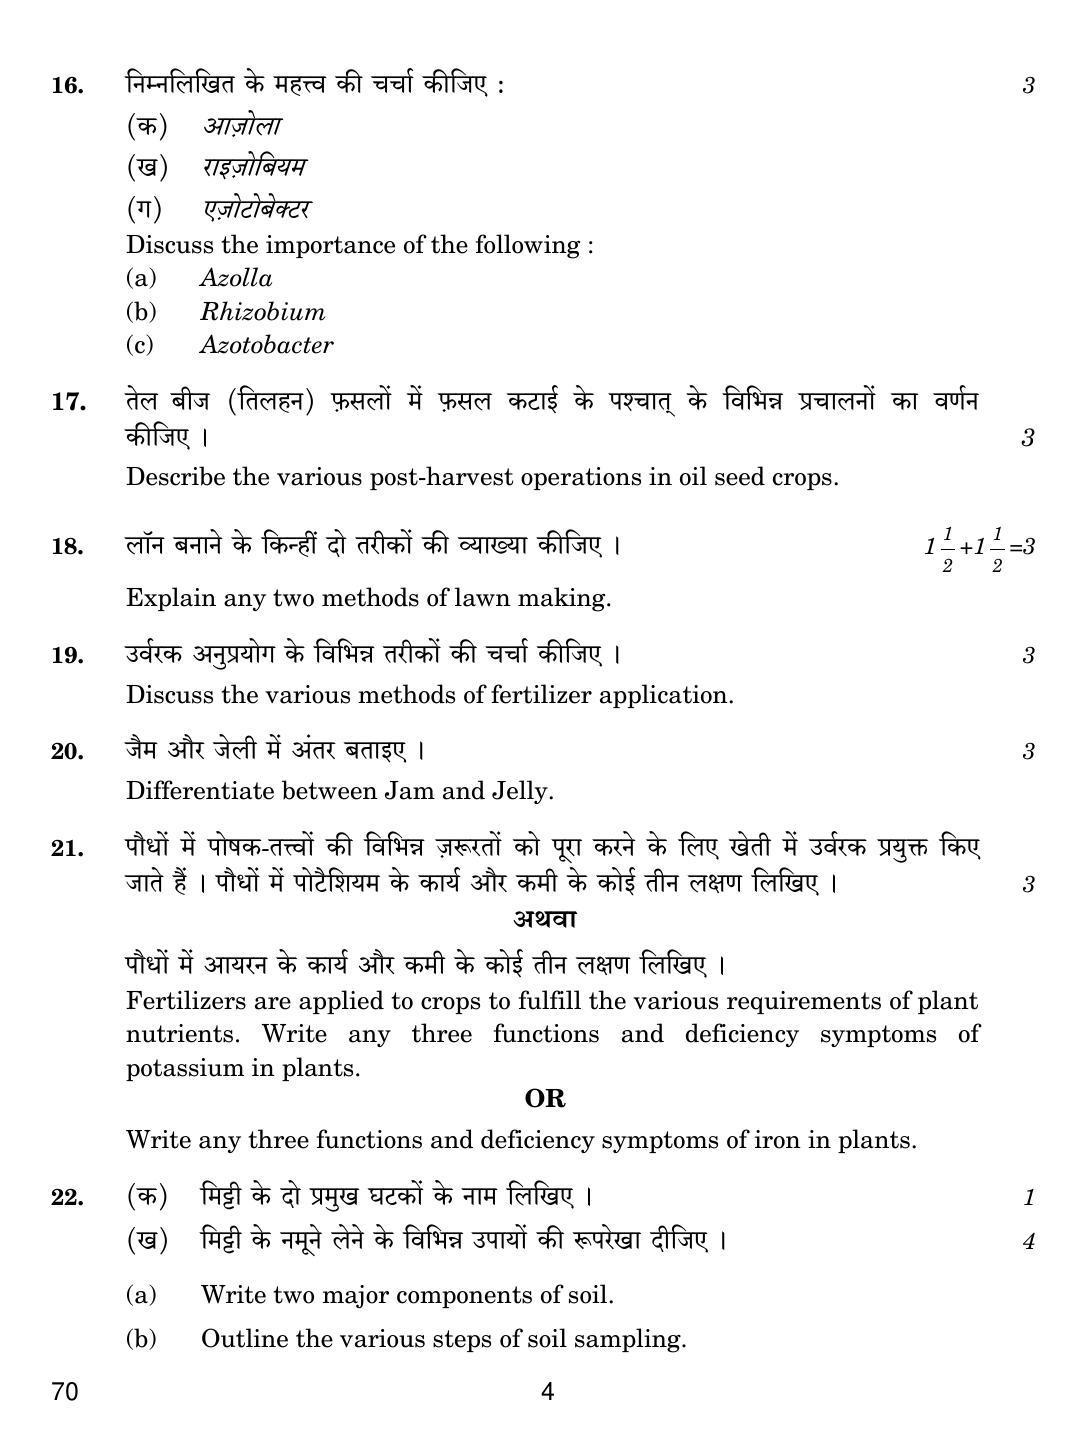 CBSE Class 12 70 Agriculture 2019 Question Paper - Page 4